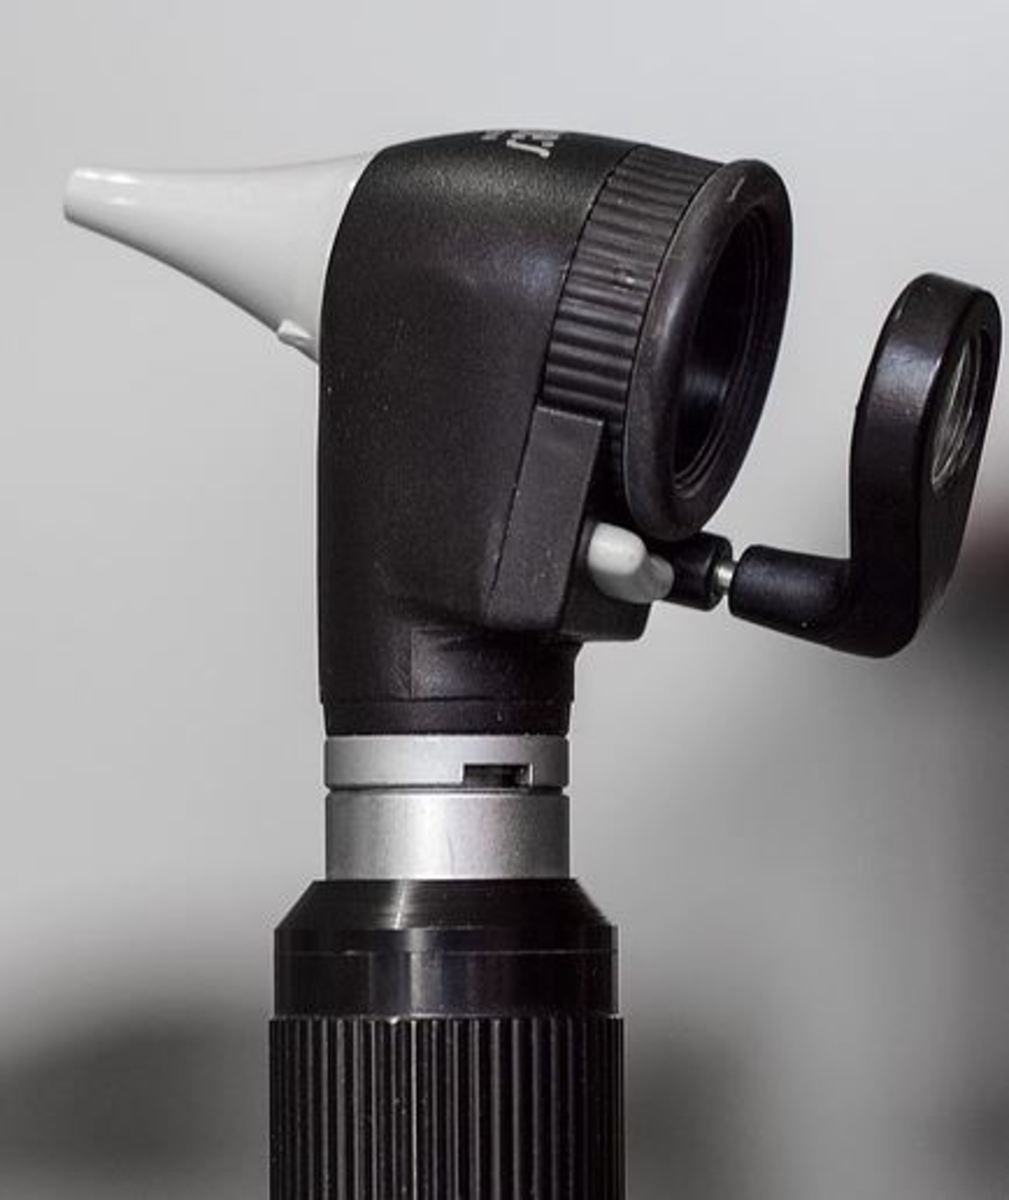  An otoscope can help your vet visualize the eardrum.